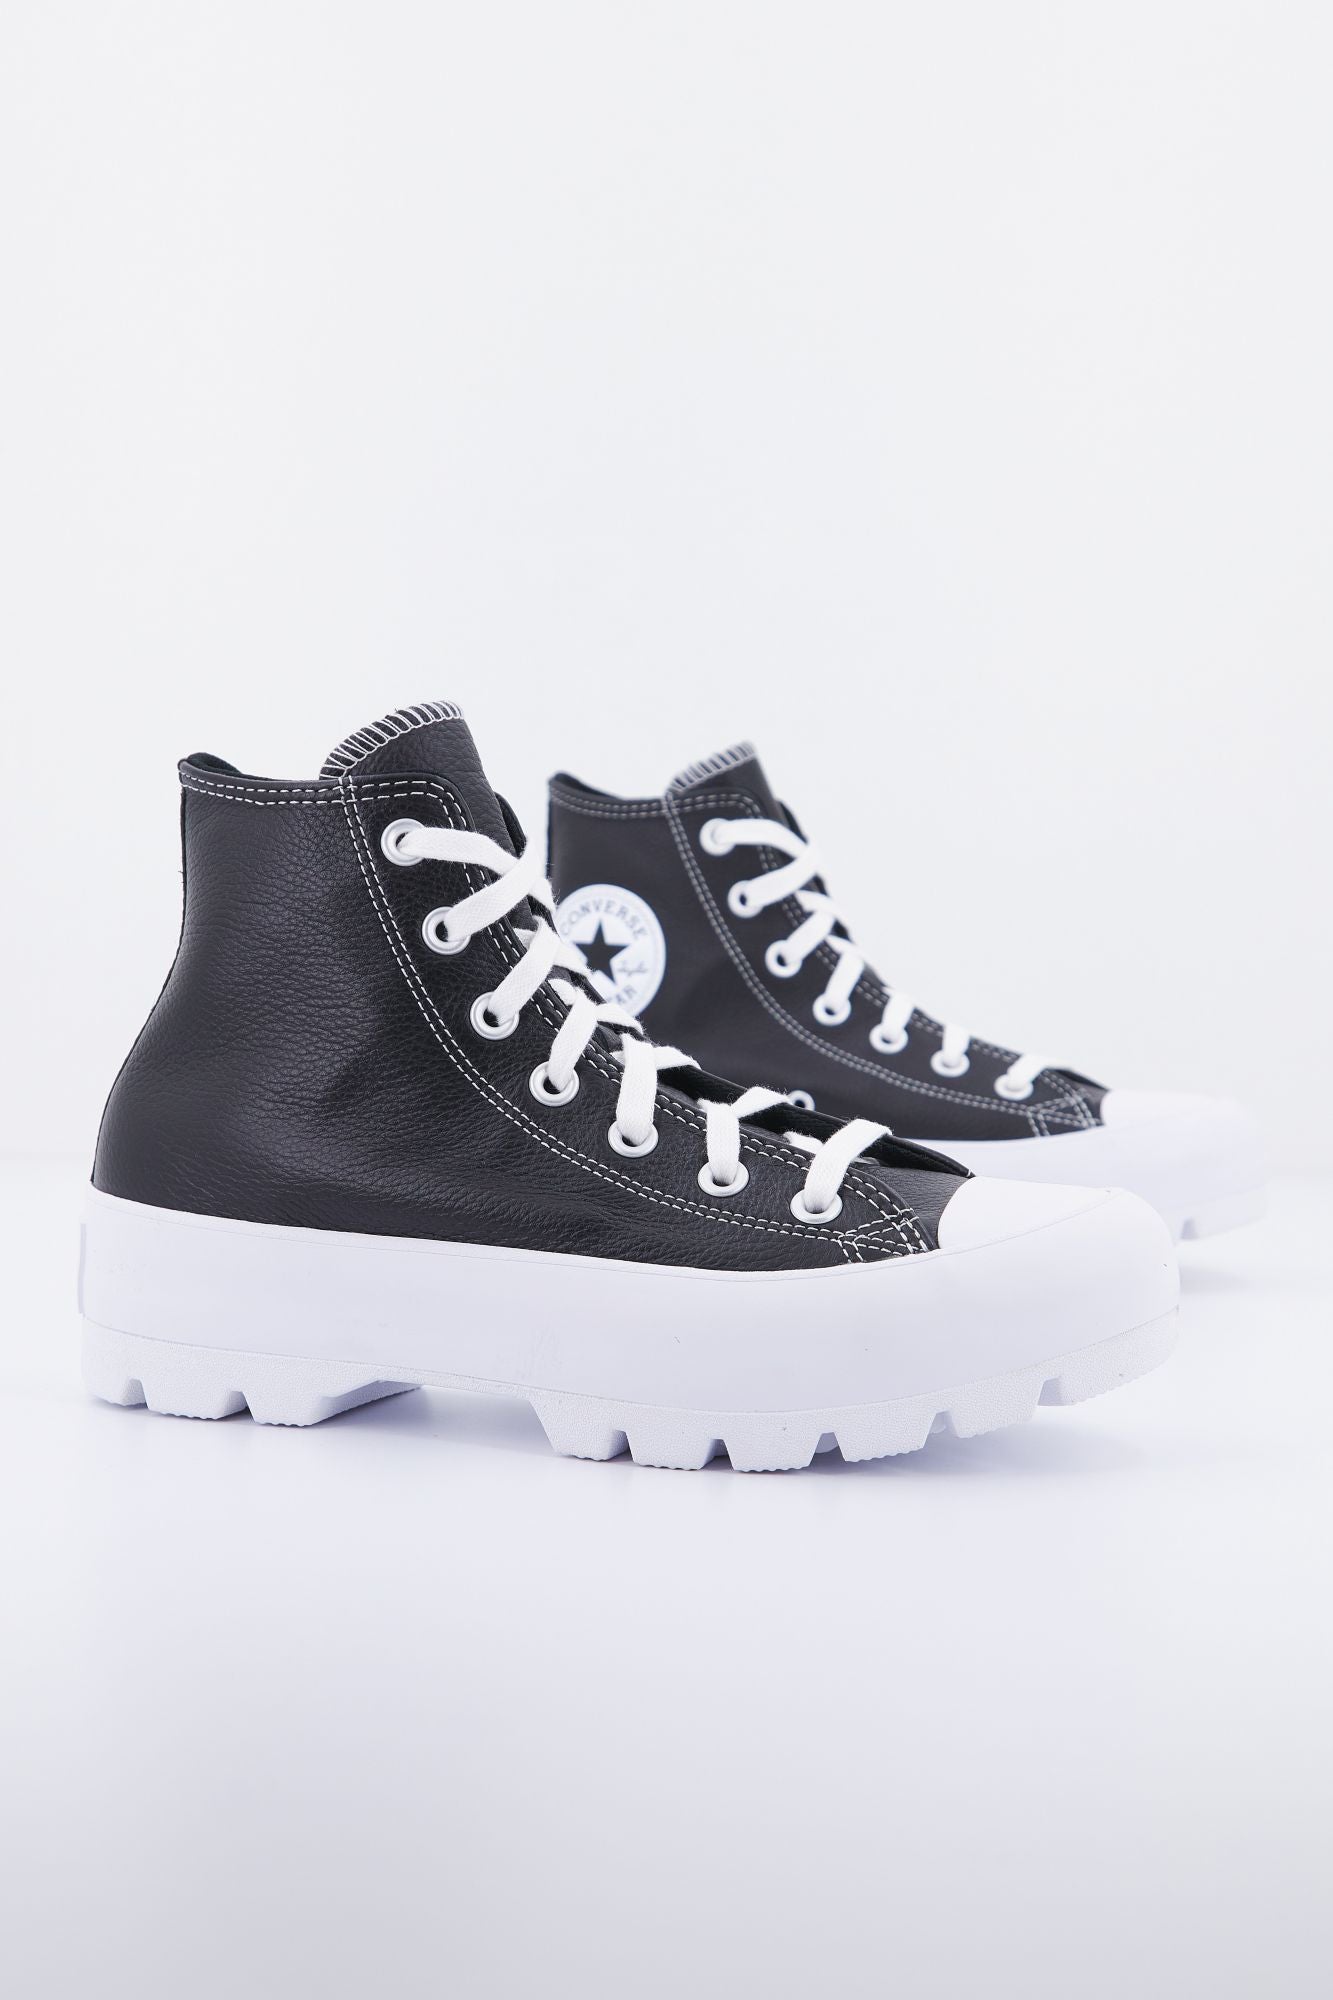 CONVERSE CHUCK TAYLOR ALL STAR LUGGED PLATAFORM LEATHER en color NEGRO (2)